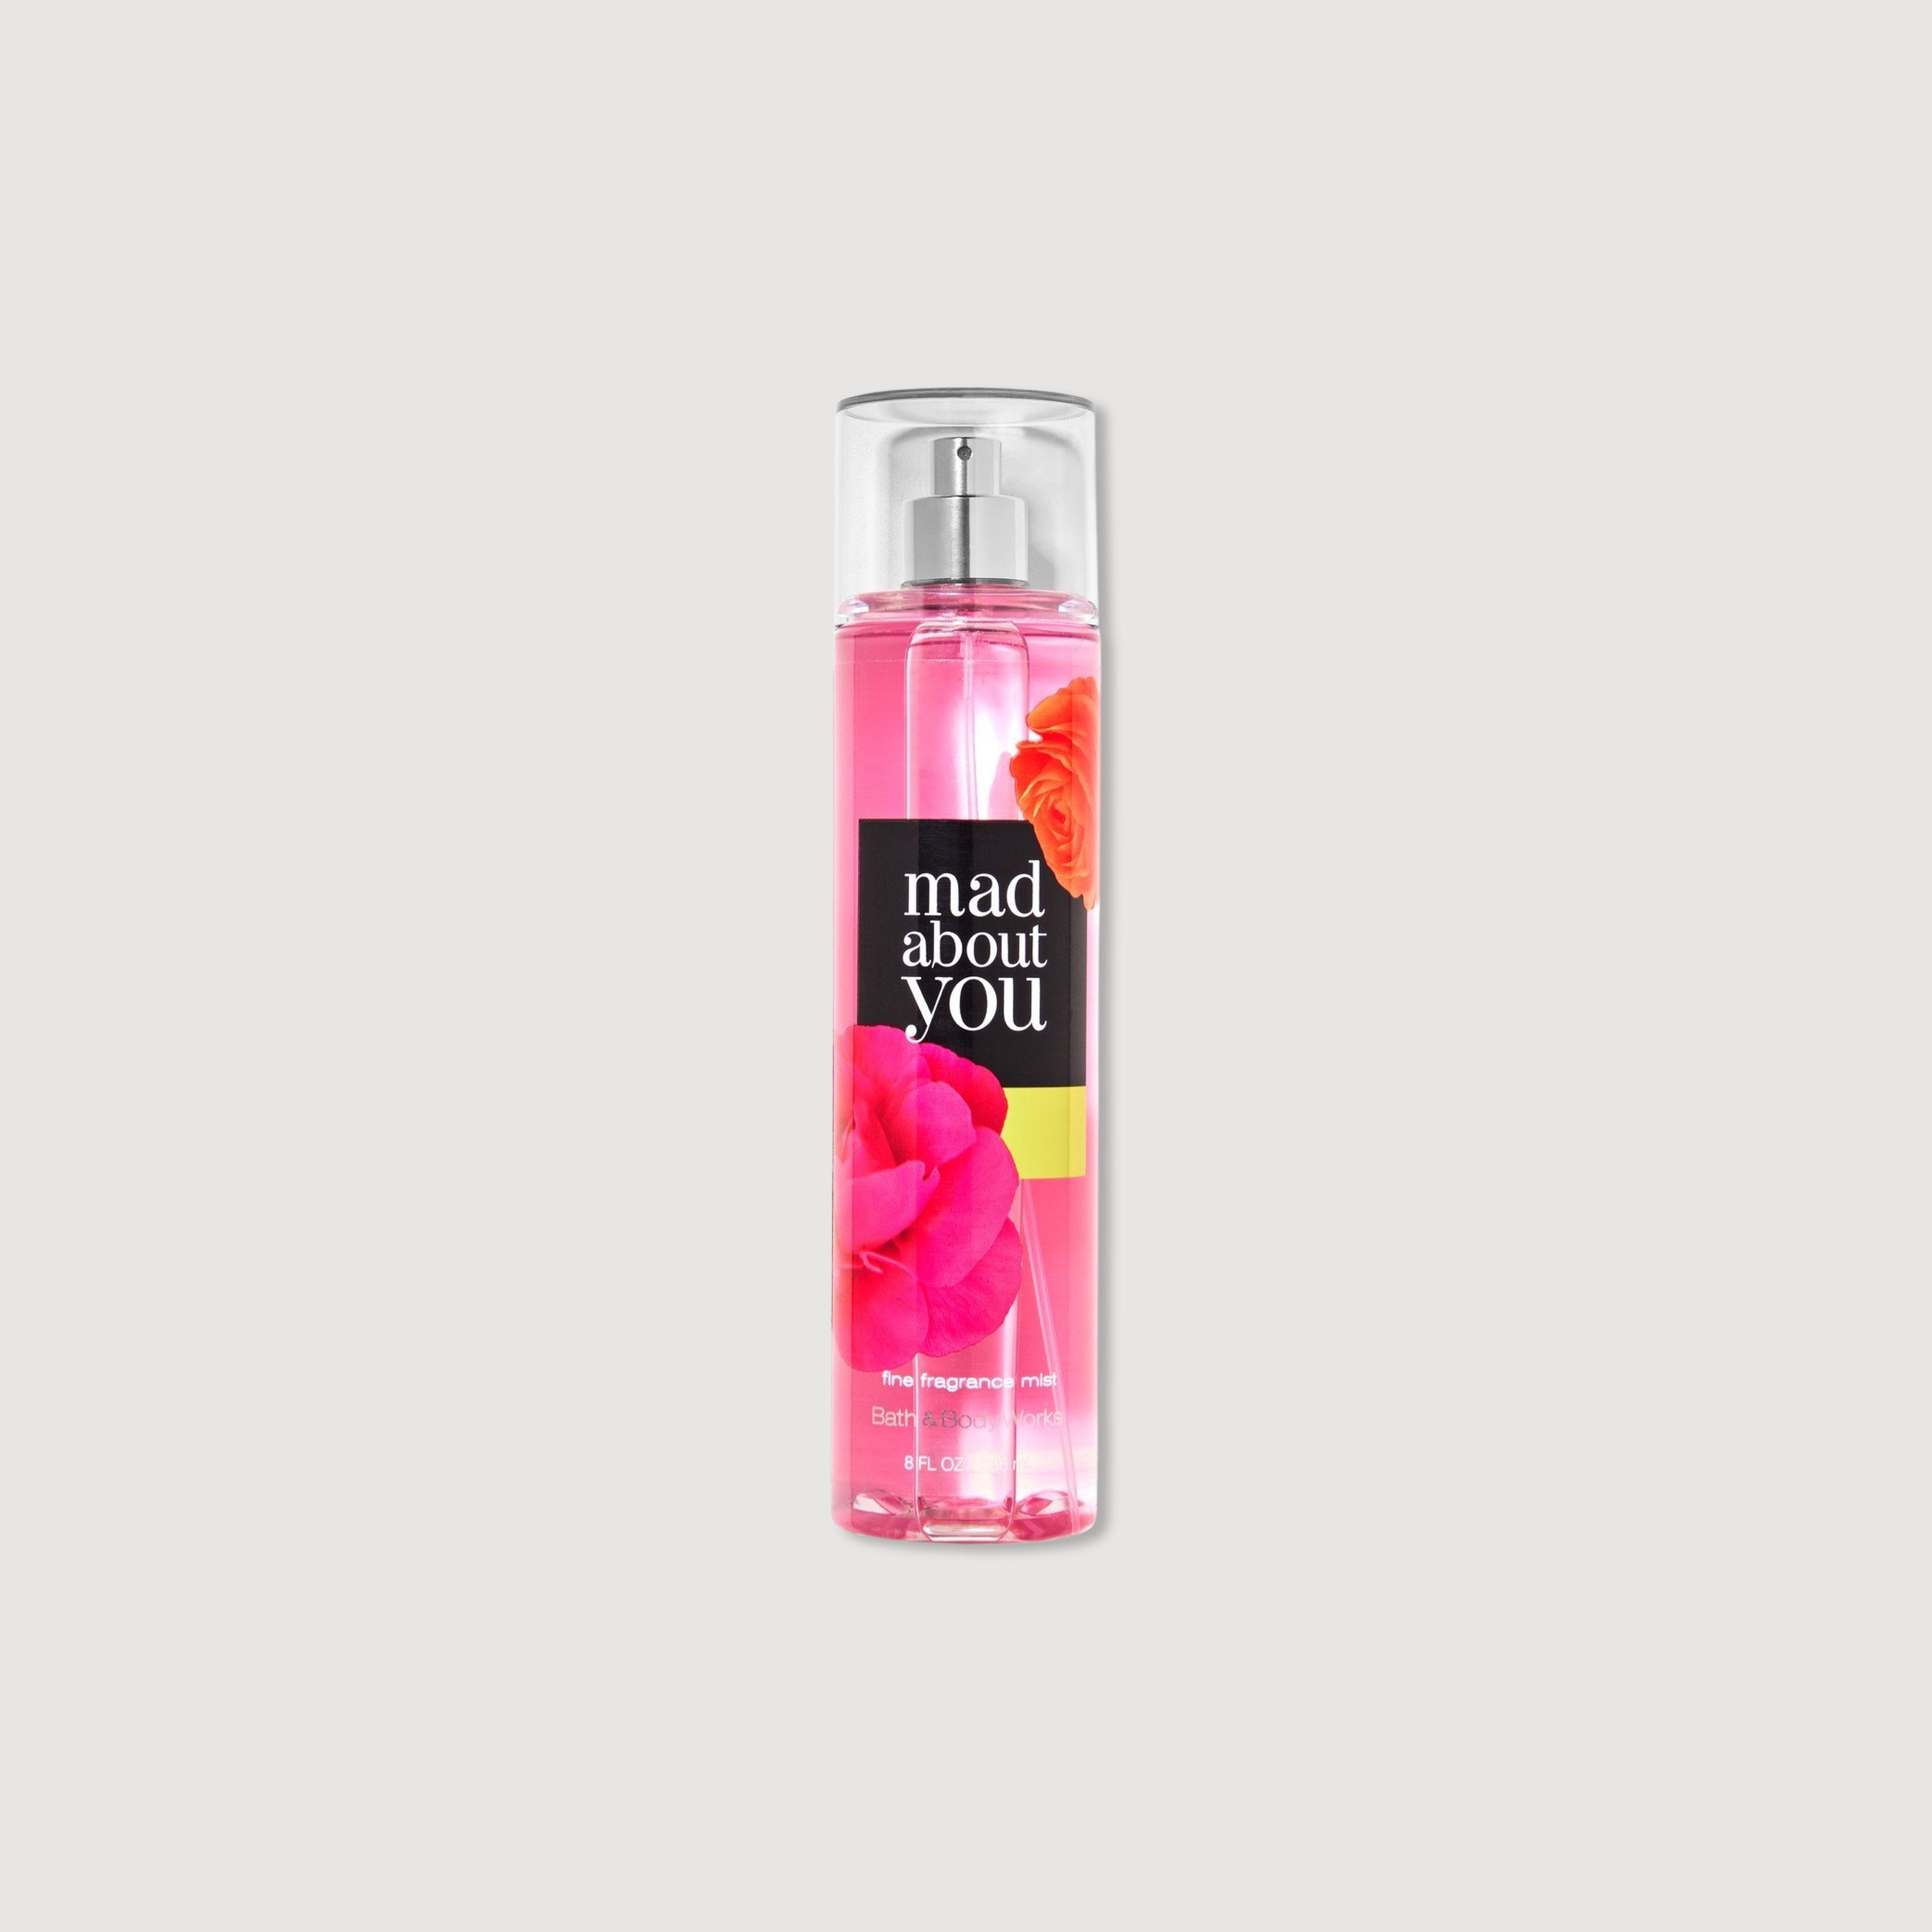 Mad About You - Bath & Body Works